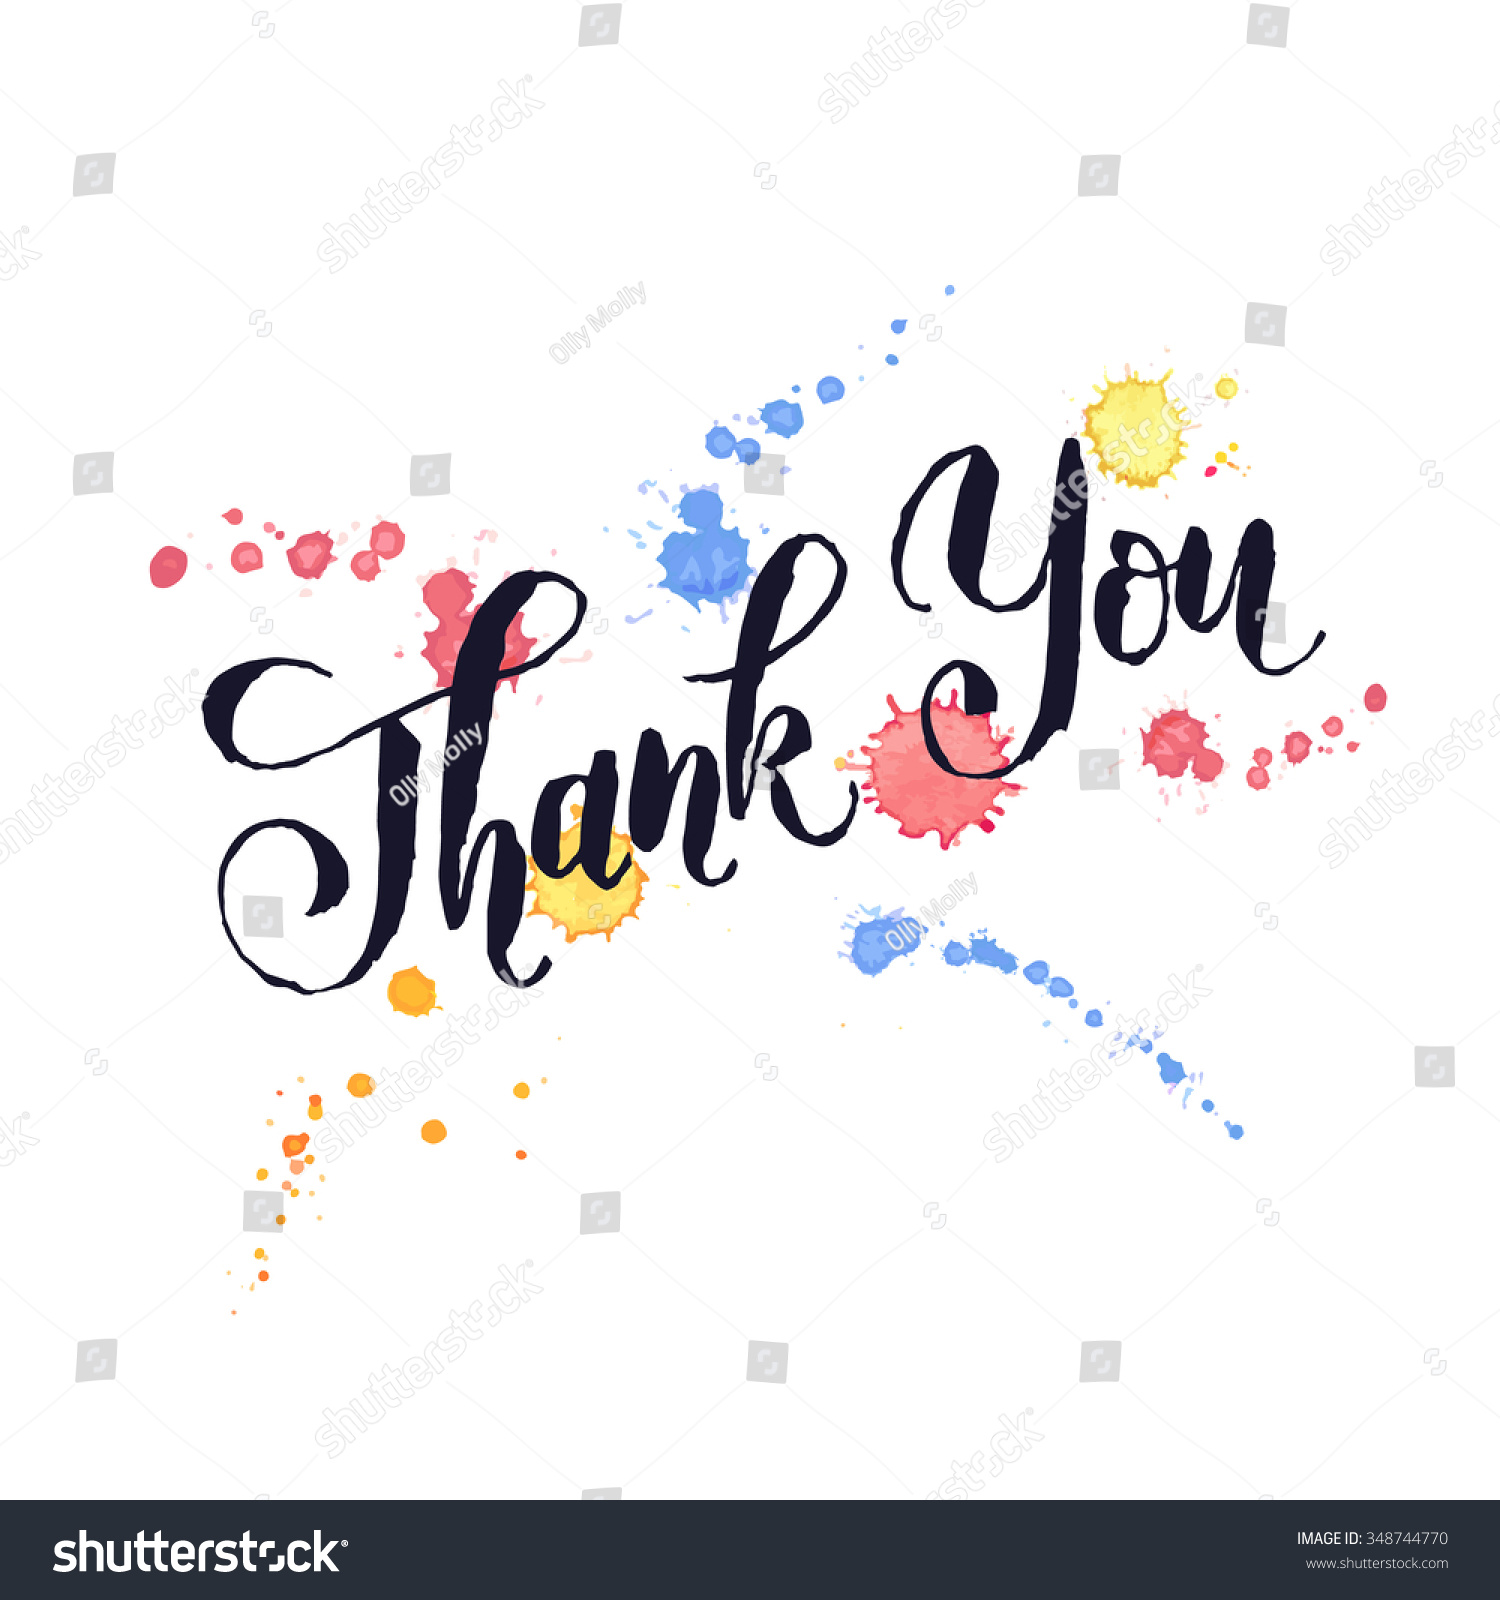 Thank you lettering with watercolor splashes on background. Modern black ink typography. Thank you colorful postcard calligraphy design.  #348744770